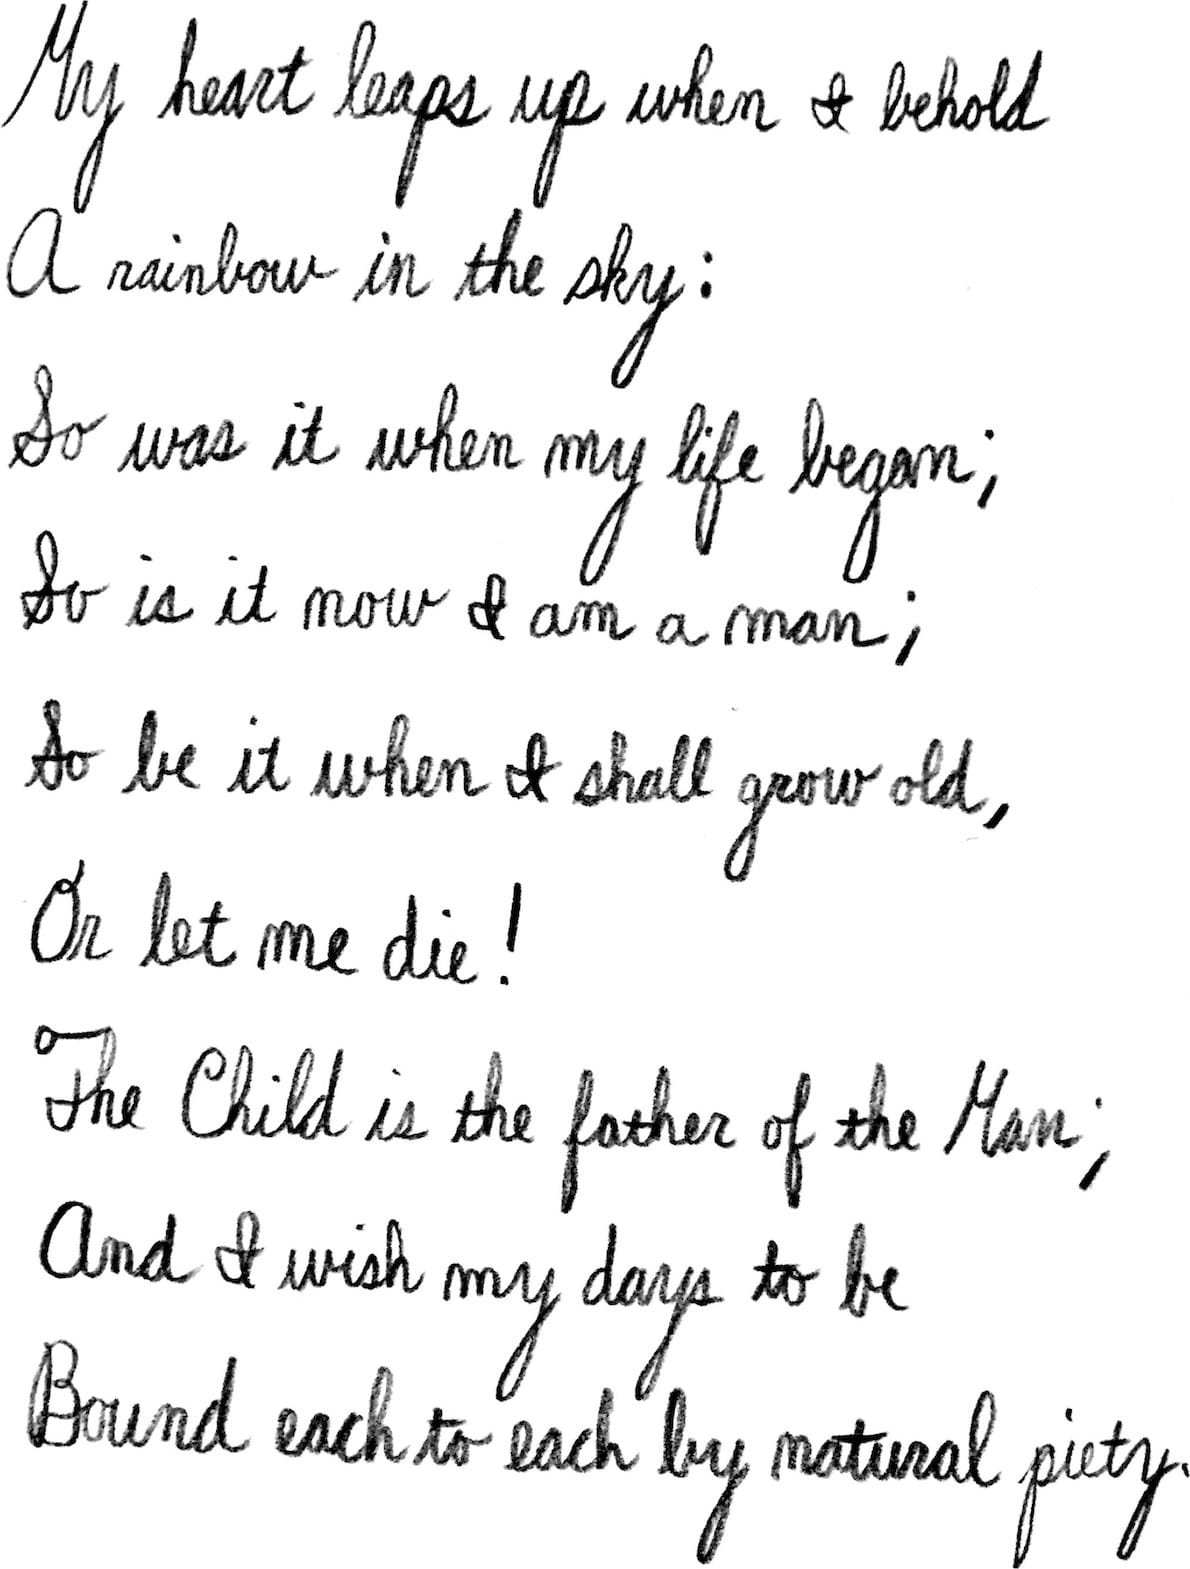 Wordsworth's "My Heart Leaps Up" written in cursive on paper